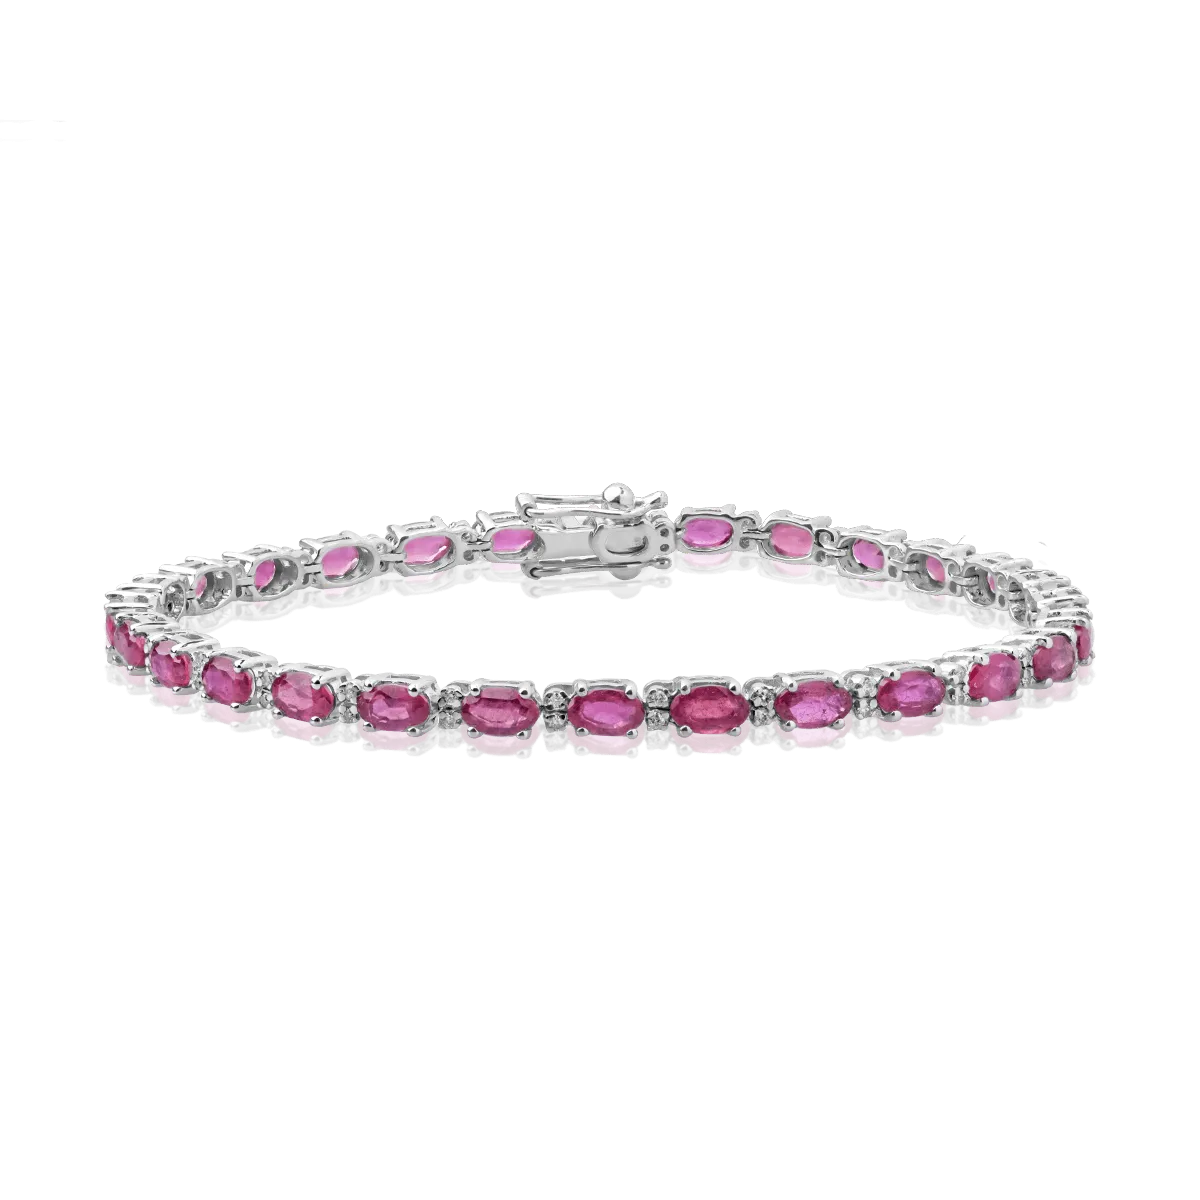 14K white gold tennis bracelet with 8.5ct treated rubies and 0.23ct diamonds